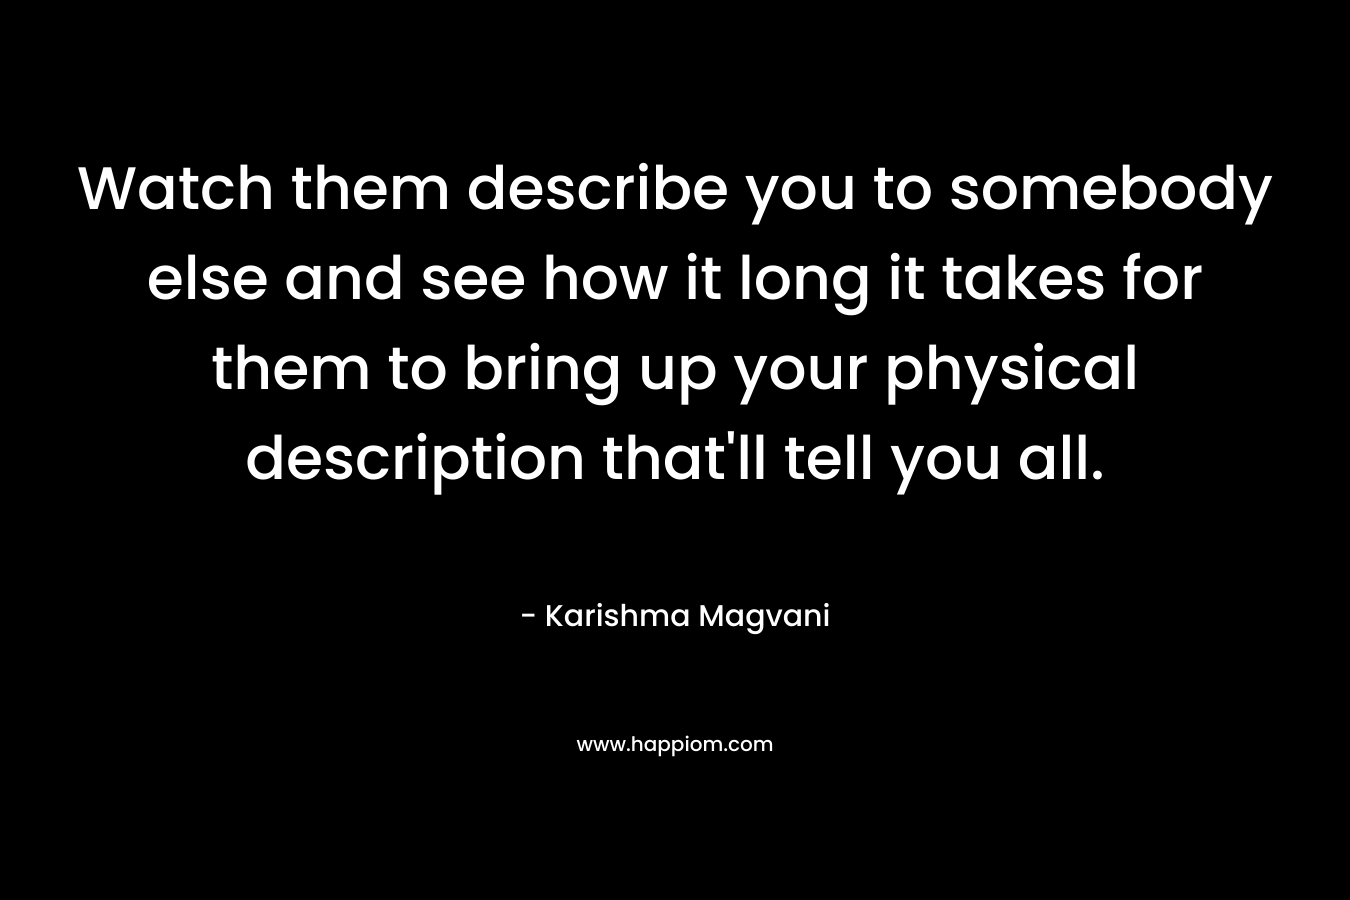 Watch them describe you to somebody else and see how it long it takes for them to bring up your physical description that’ll tell you all. – Karishma Magvani